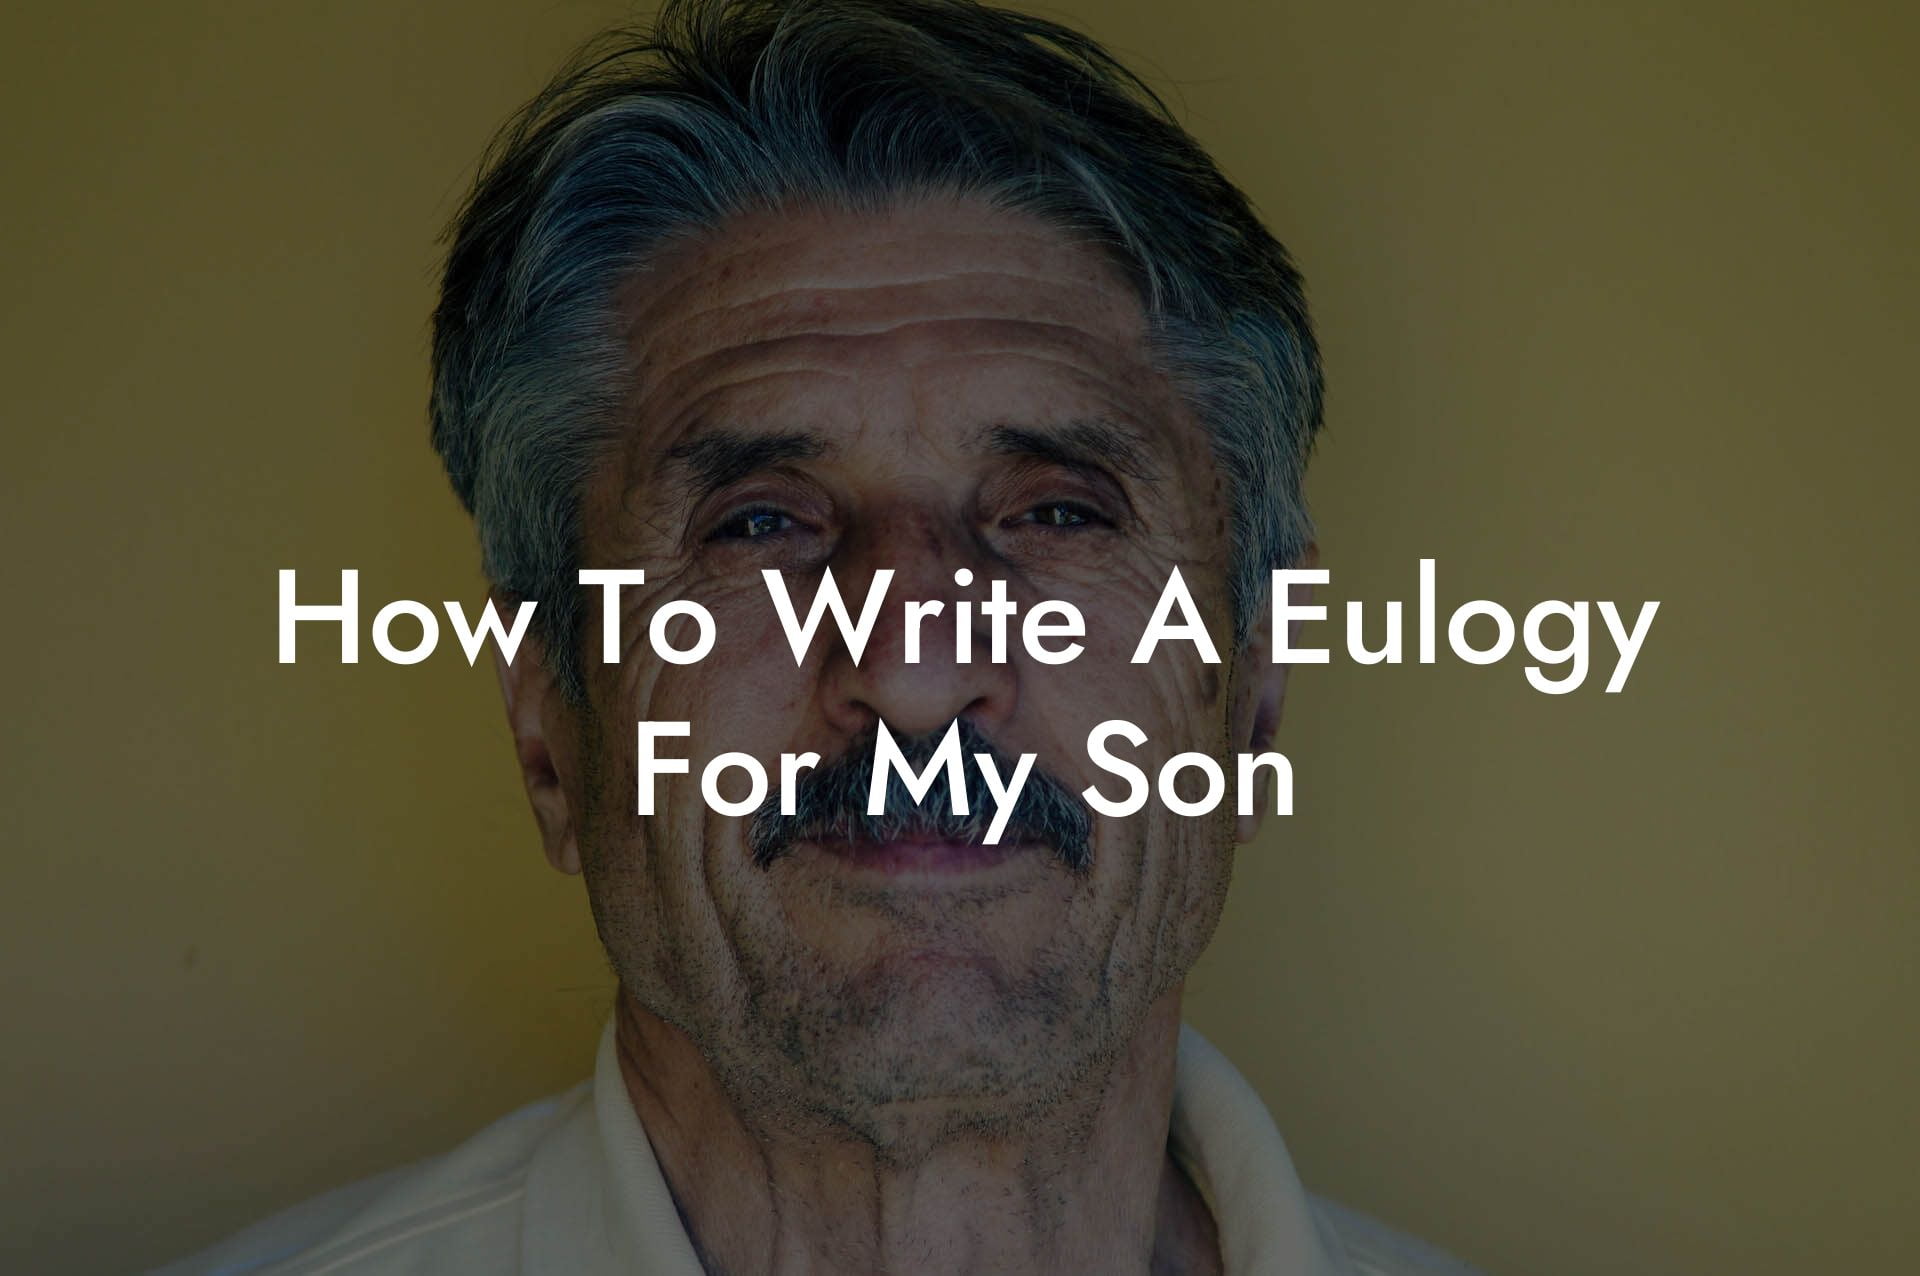 How To Write A Eulogy For My Son